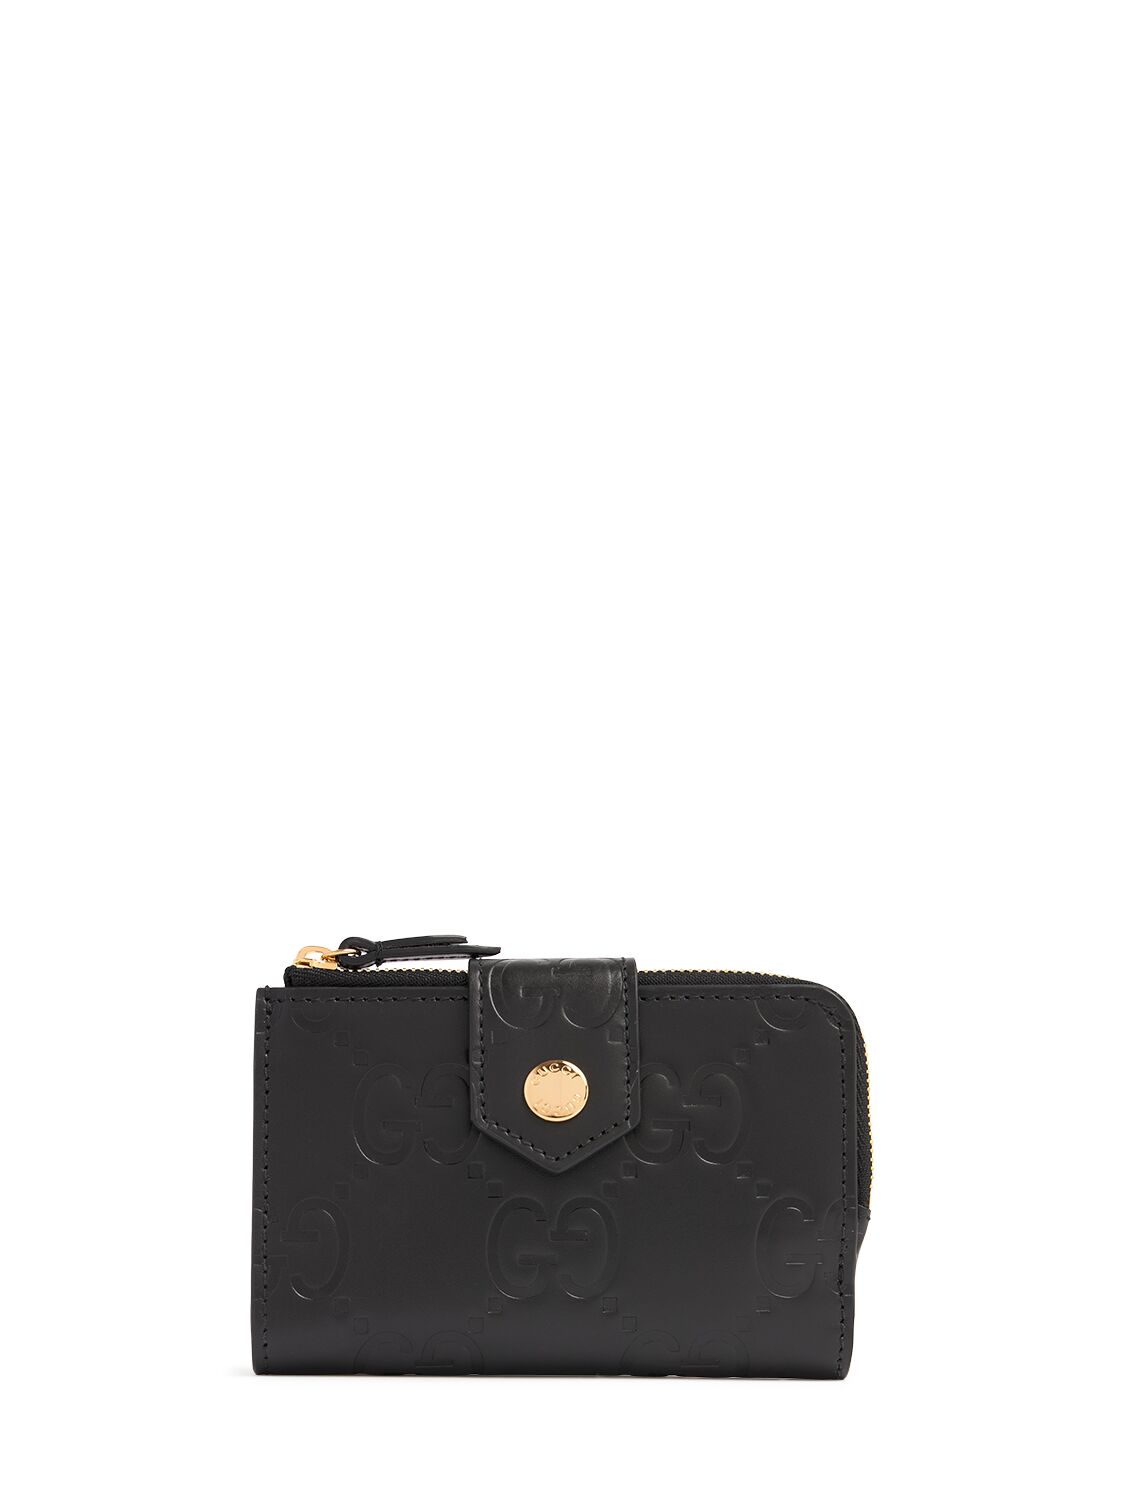 Gucci Gg Leather Wallet In Black